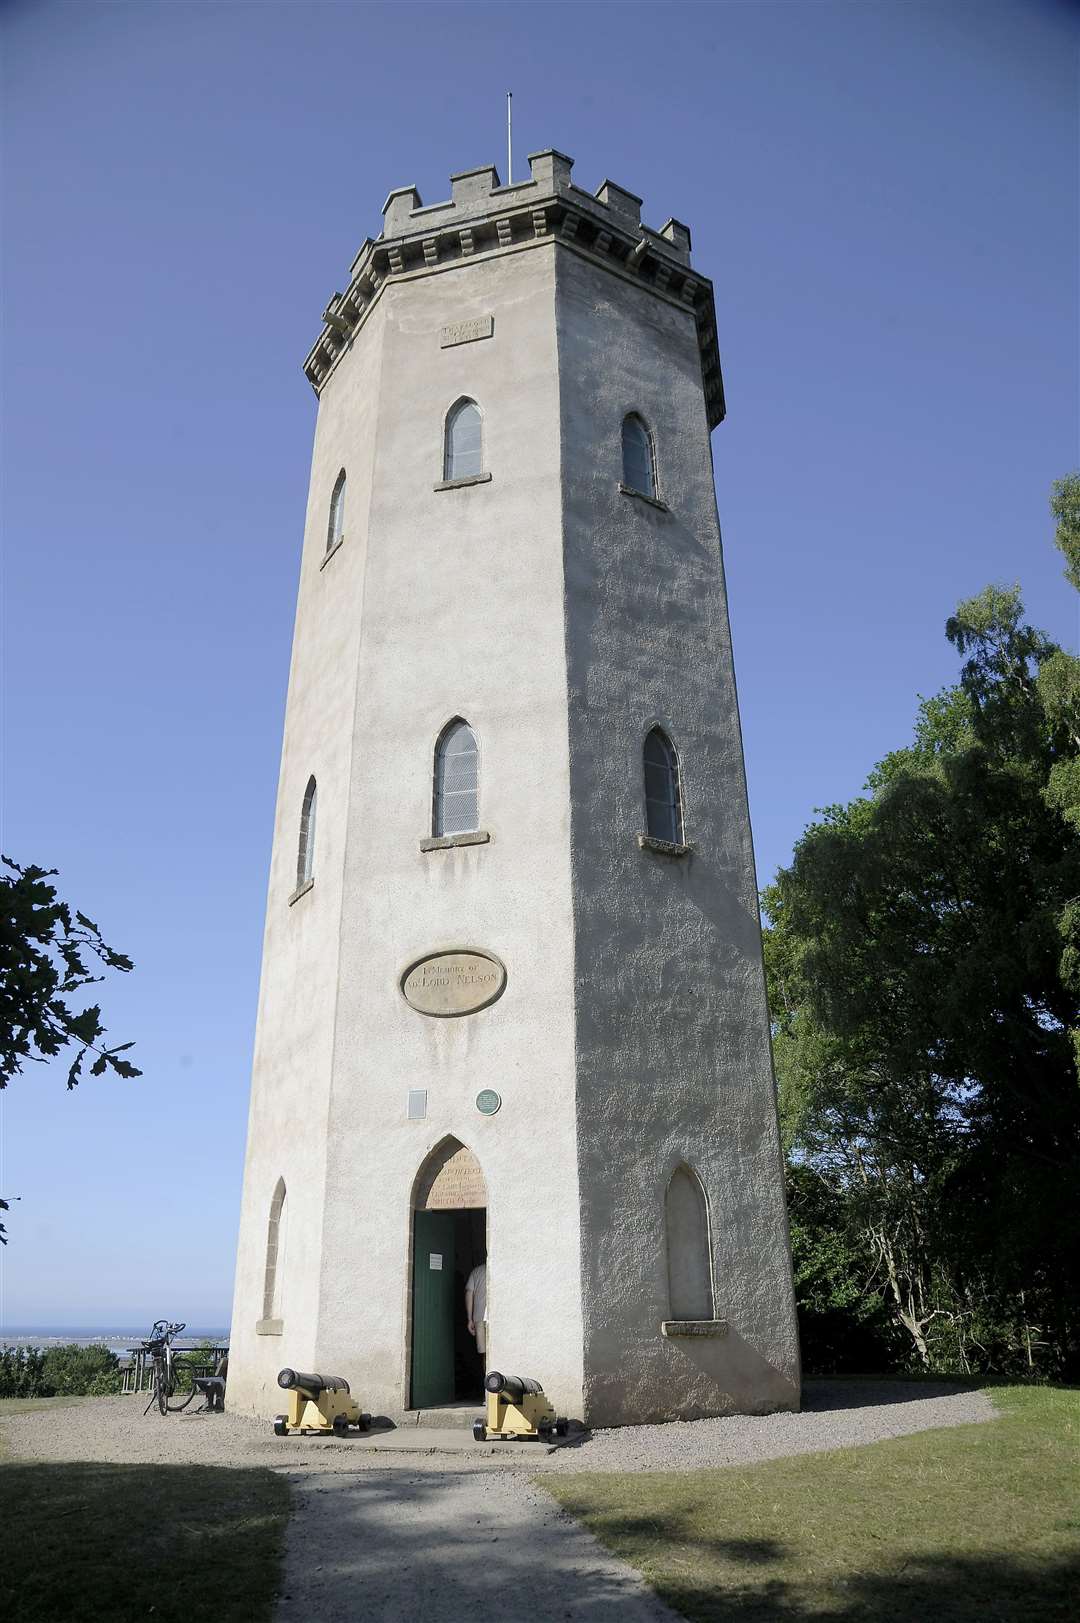 Nelson Tower was the first monument erected following the Admiral's death in 1805.